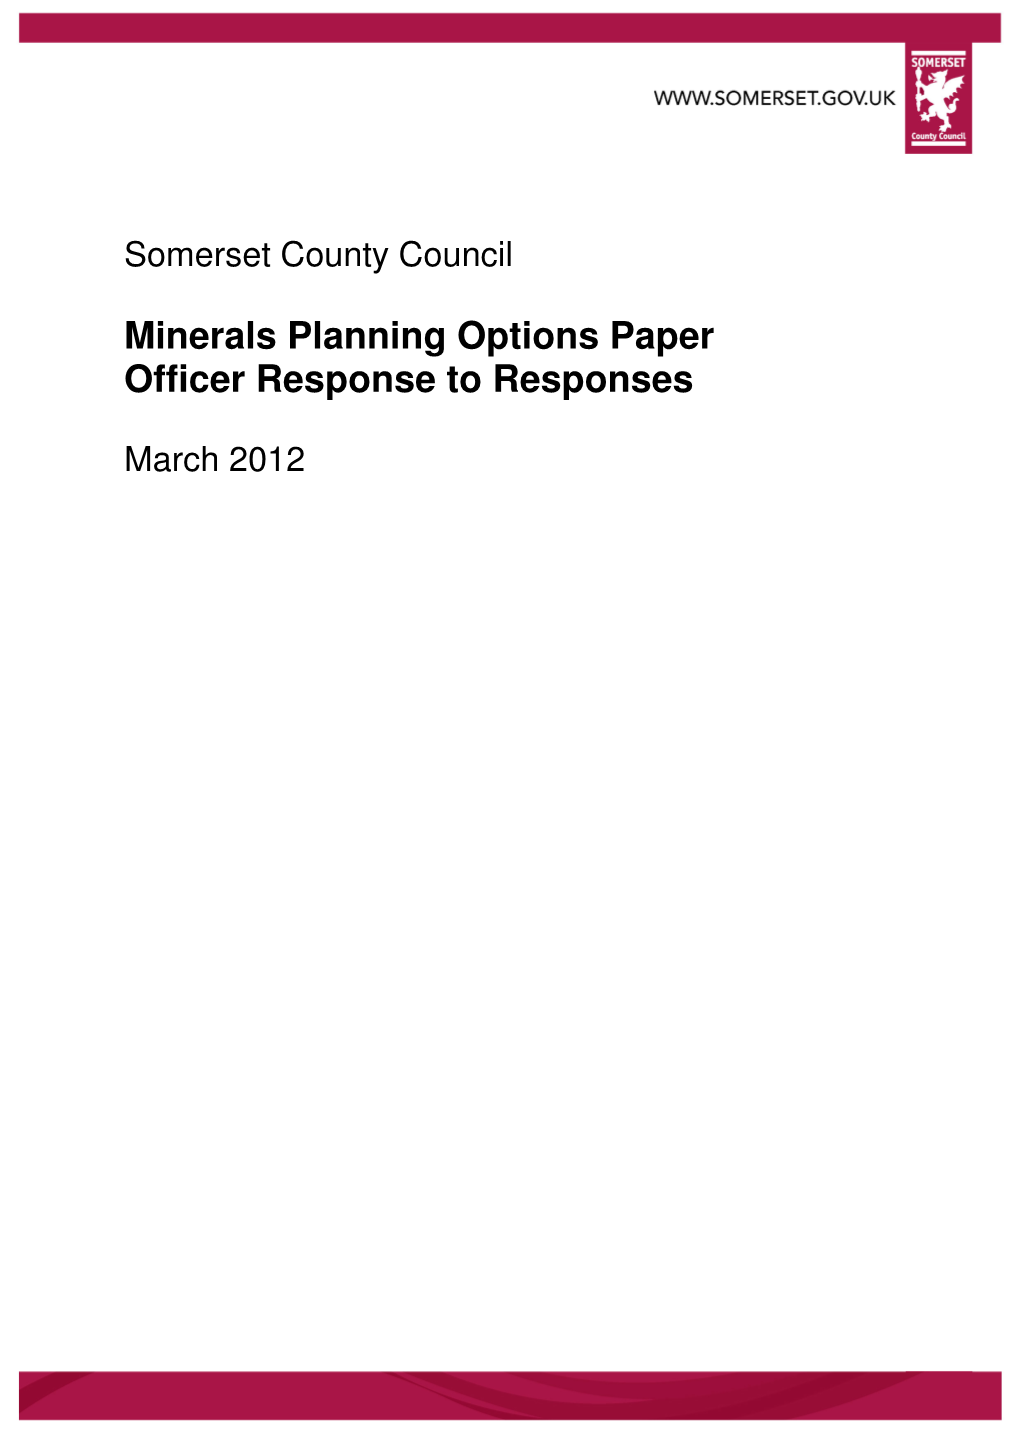 Minerals Planning Options Paper Officer Response to Responses